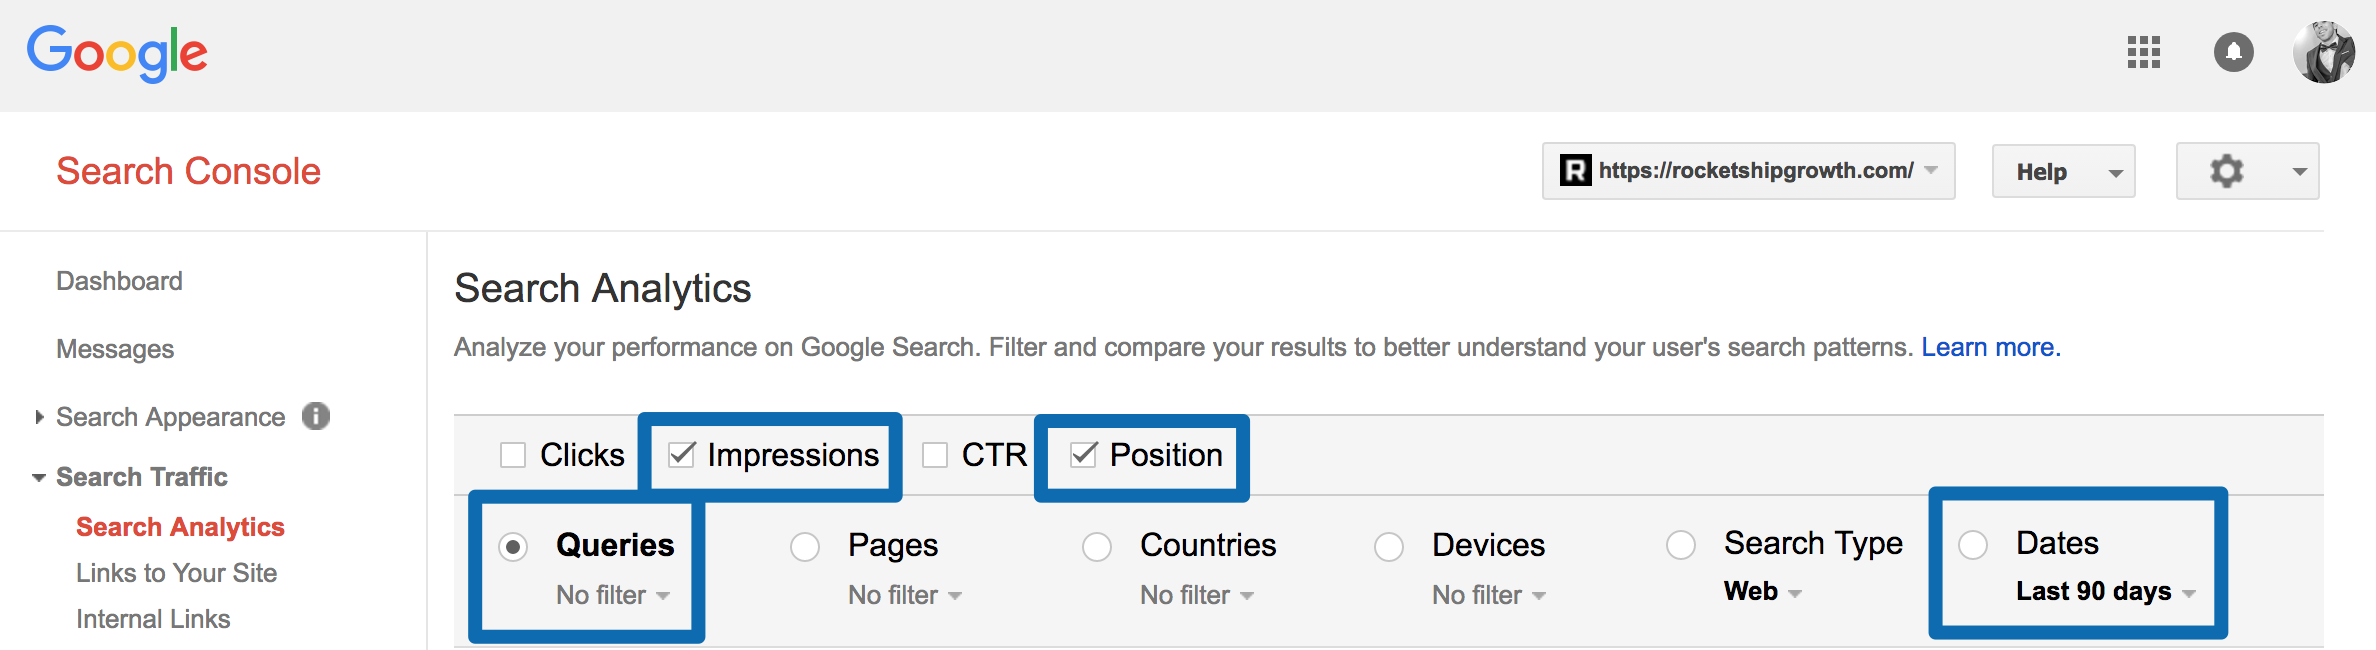 Screenshot showing an analytics search on the Google search console